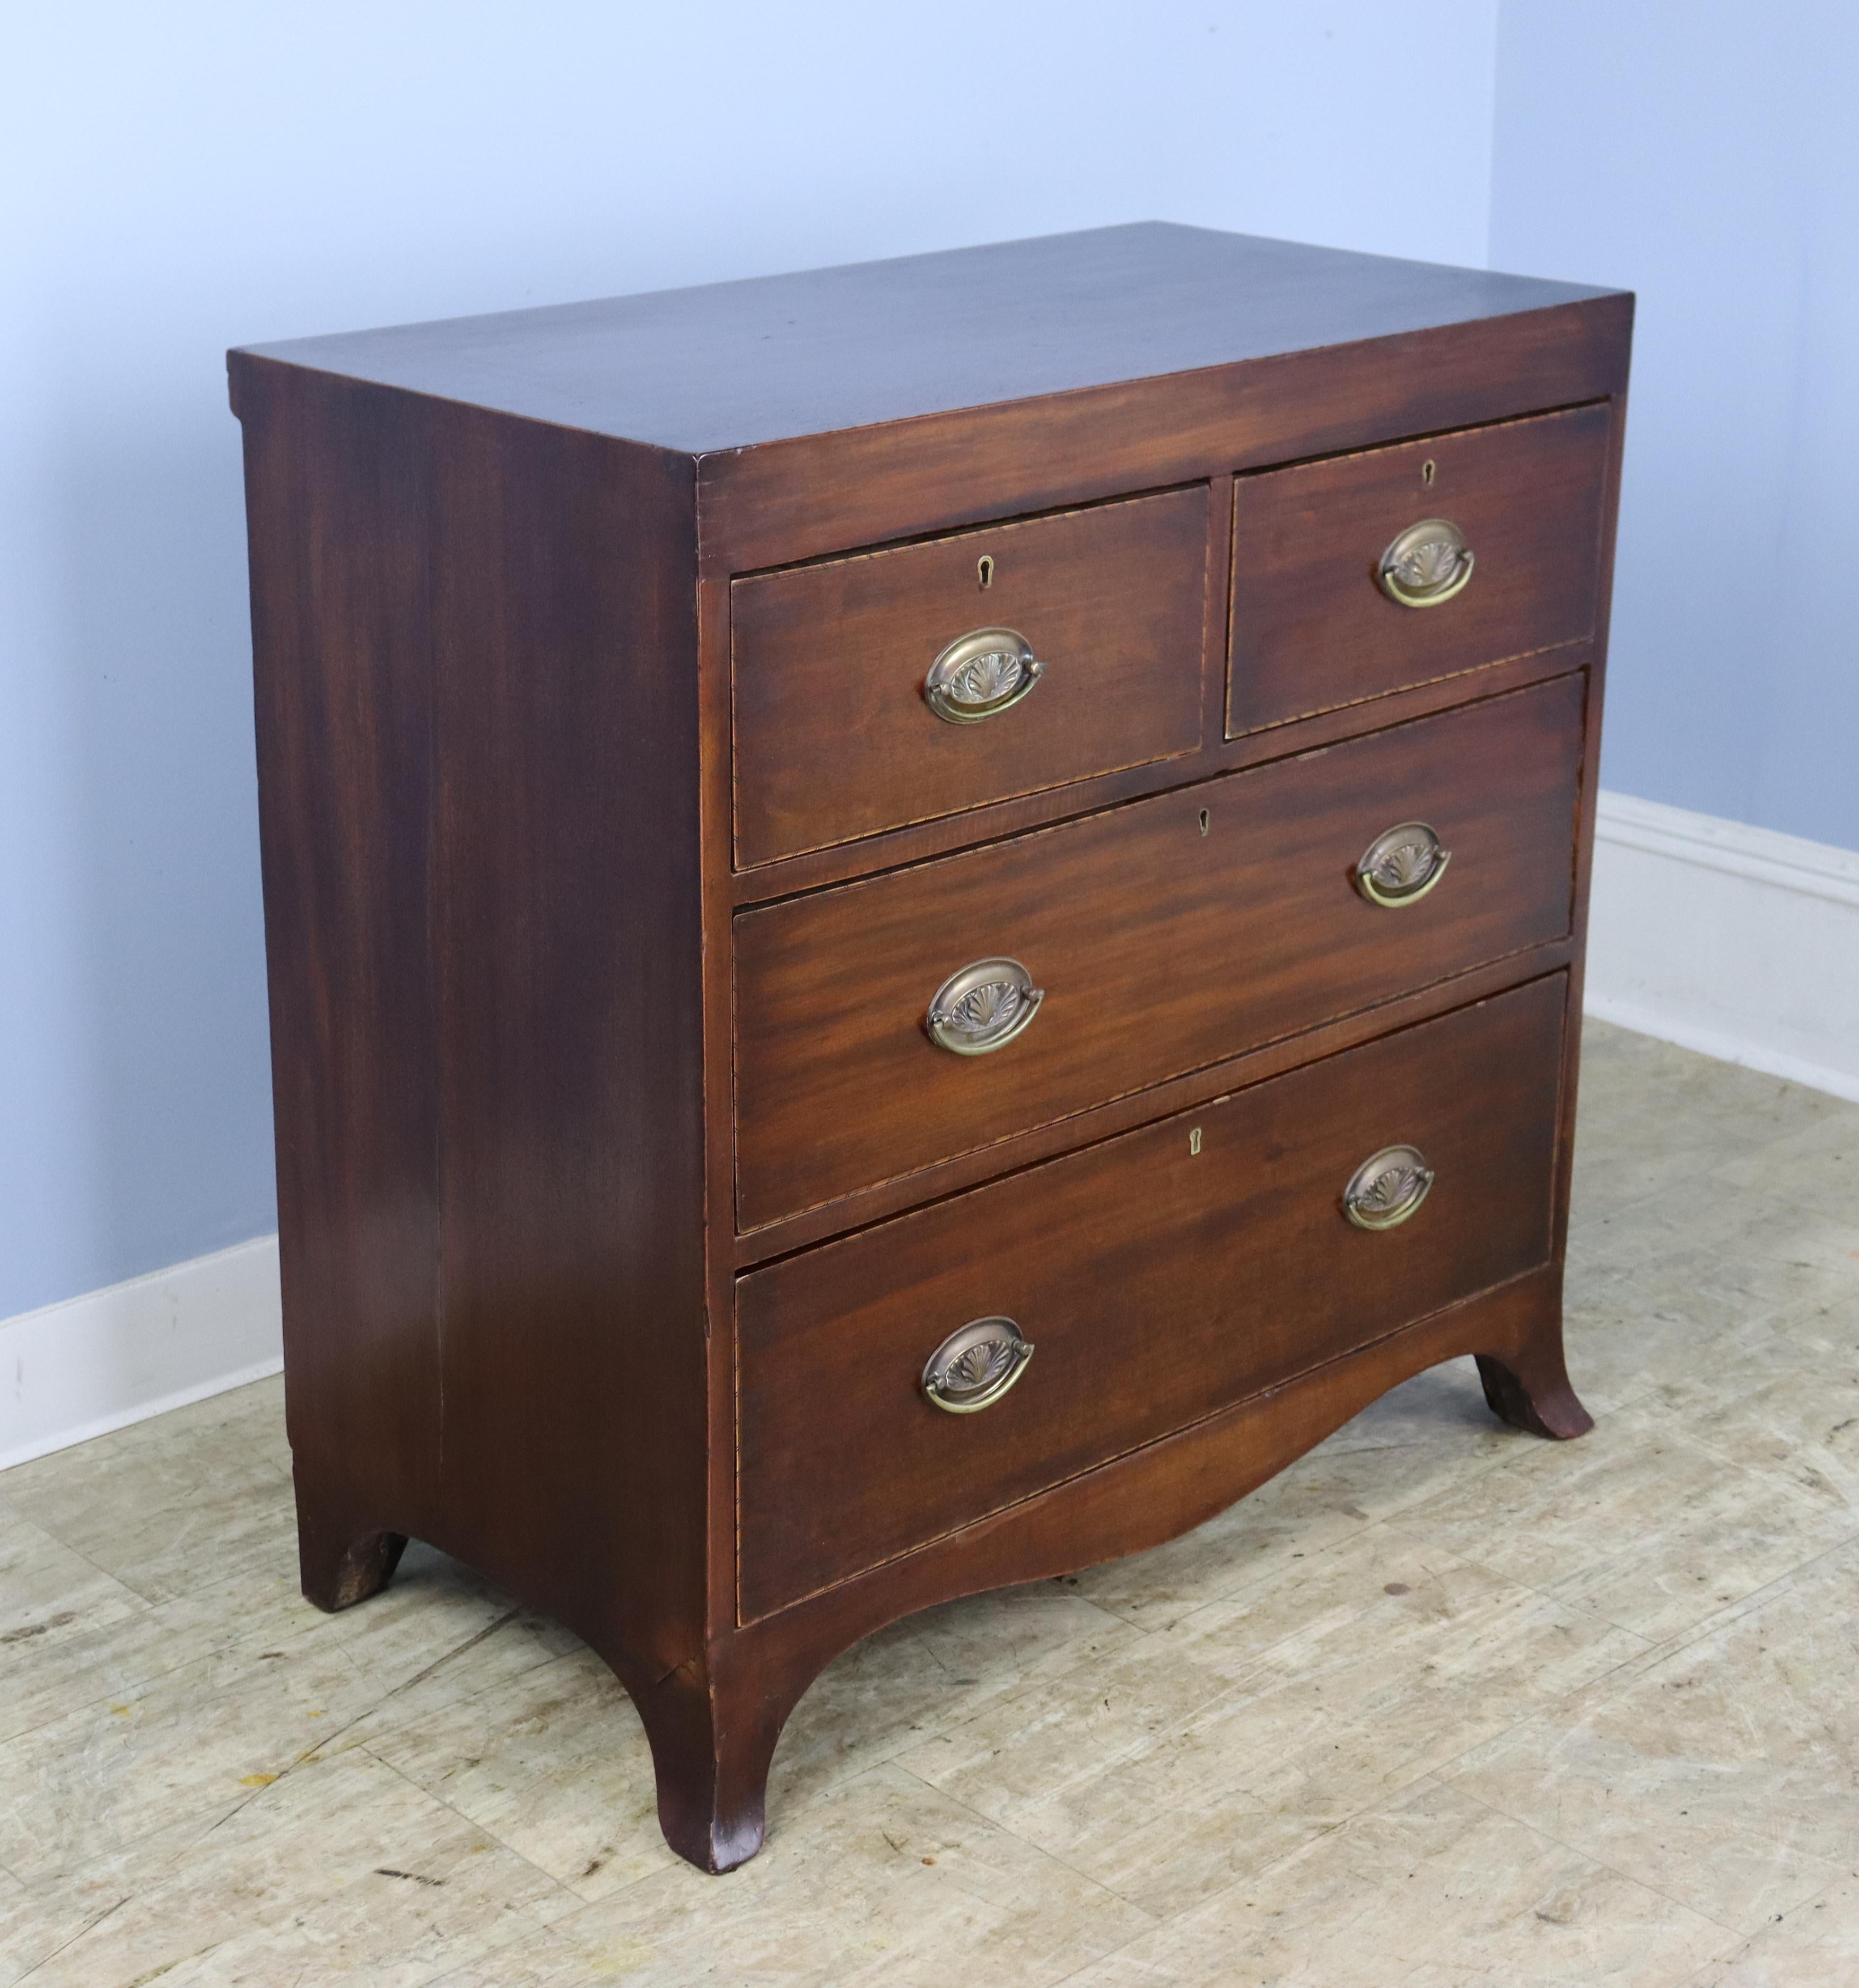 A small chest of drawers from the Regency period with flared feet and delicate intricate stringing around the top and drawers, in good antique condition.  Classic two over two construction.  Original oval braases.  There is some wear on the feet